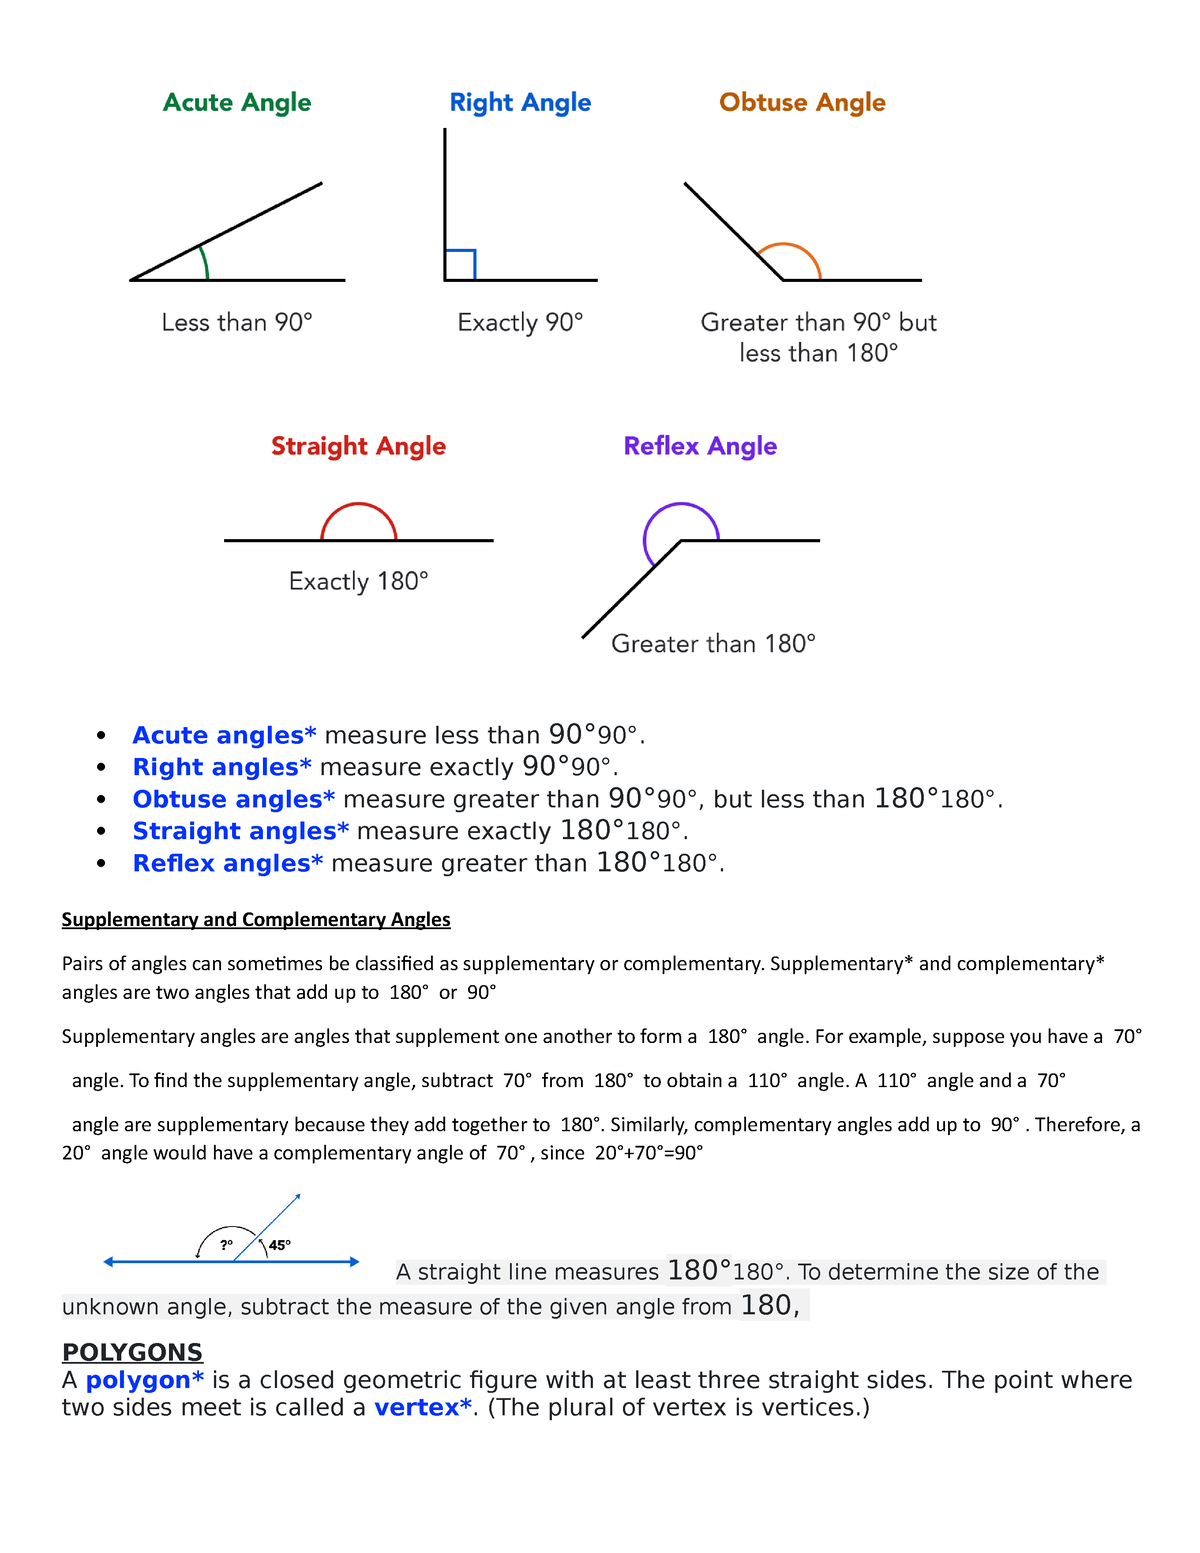 D127 study guide - Acute angles* measure less than 90°90°. Right angles ...